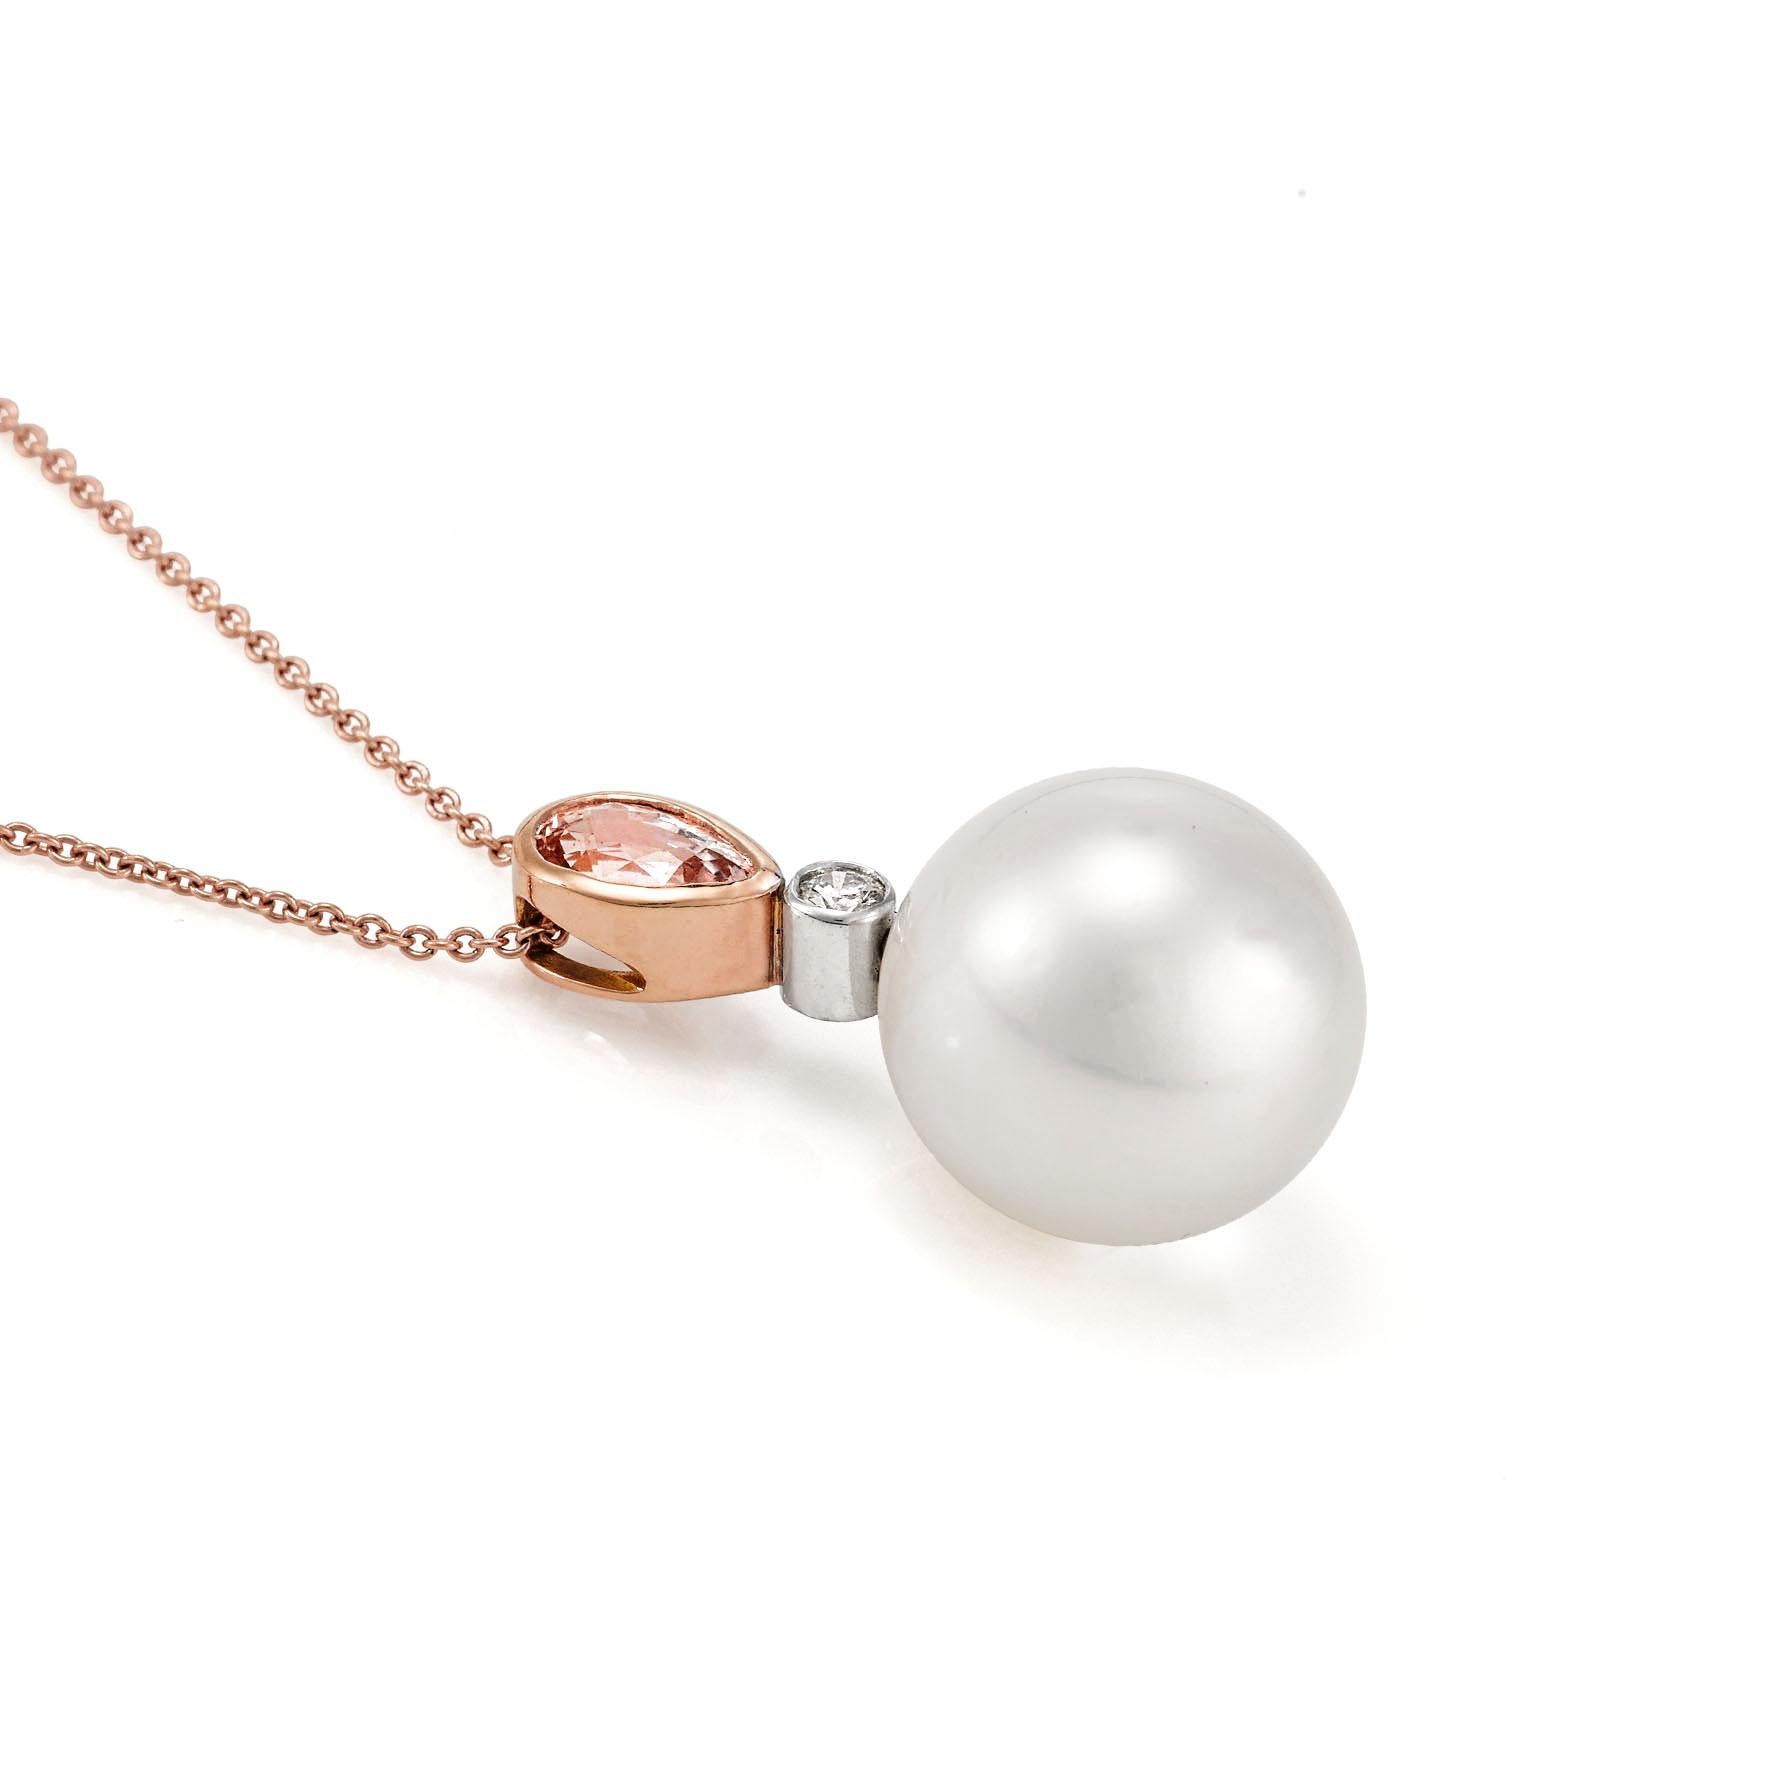 Giulians 18 karat Australian South Sea pearl, diamond and padparadscha sapphire pendant. This pendant features a top quality 14.7mm round, south sea cultured pearl with a high lustre and clean surface.  The bail features a 0.08ct round brilliant cut